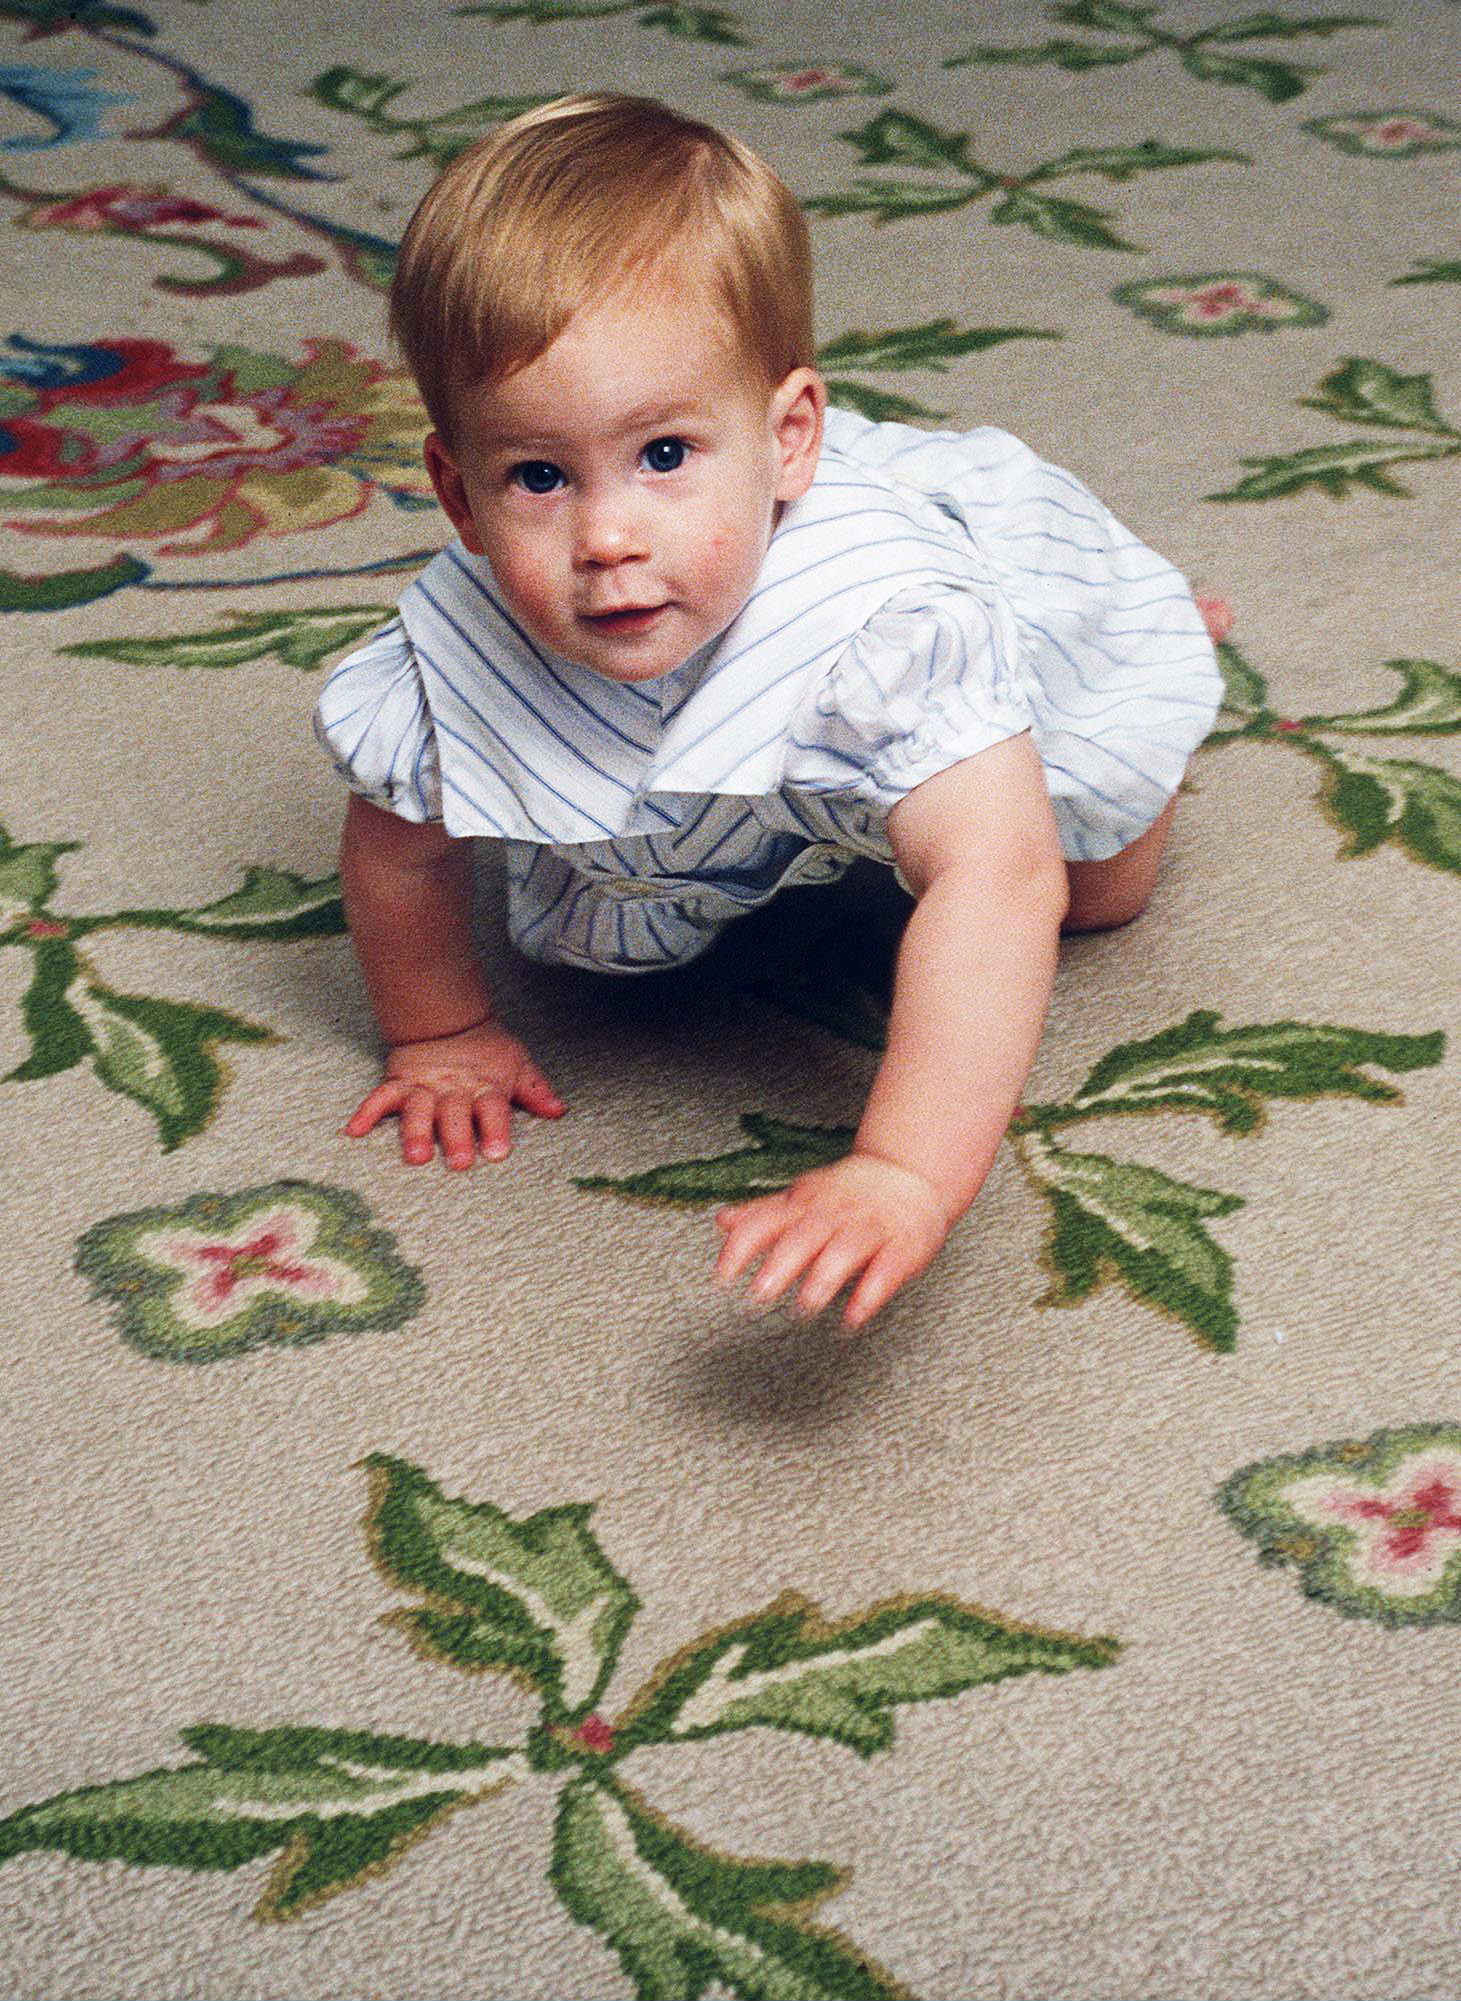 Prince Harry learning to crawl at home in Kensington Palace, London on Oct. 4, 1985.